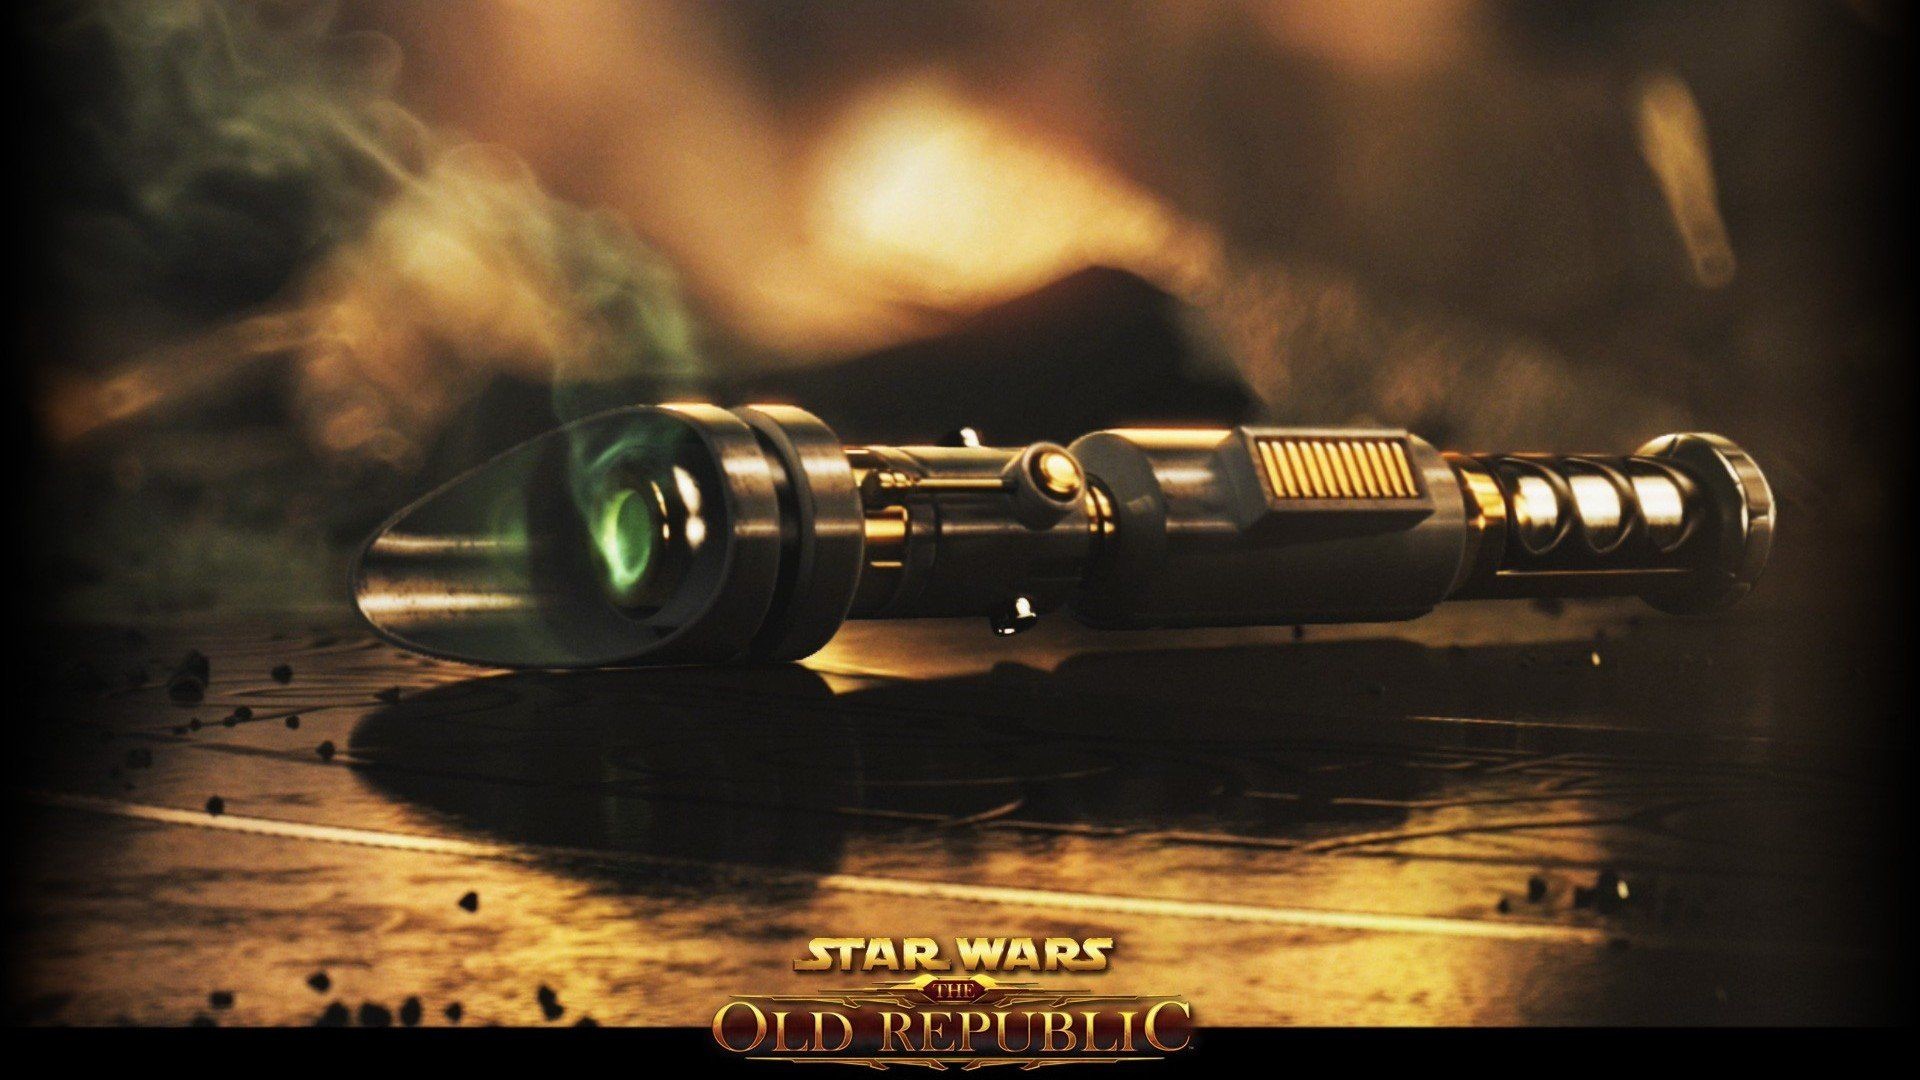 1920x1080 STAR WARS Old Republic sci-fi futuristic action fighting mmo rpg .